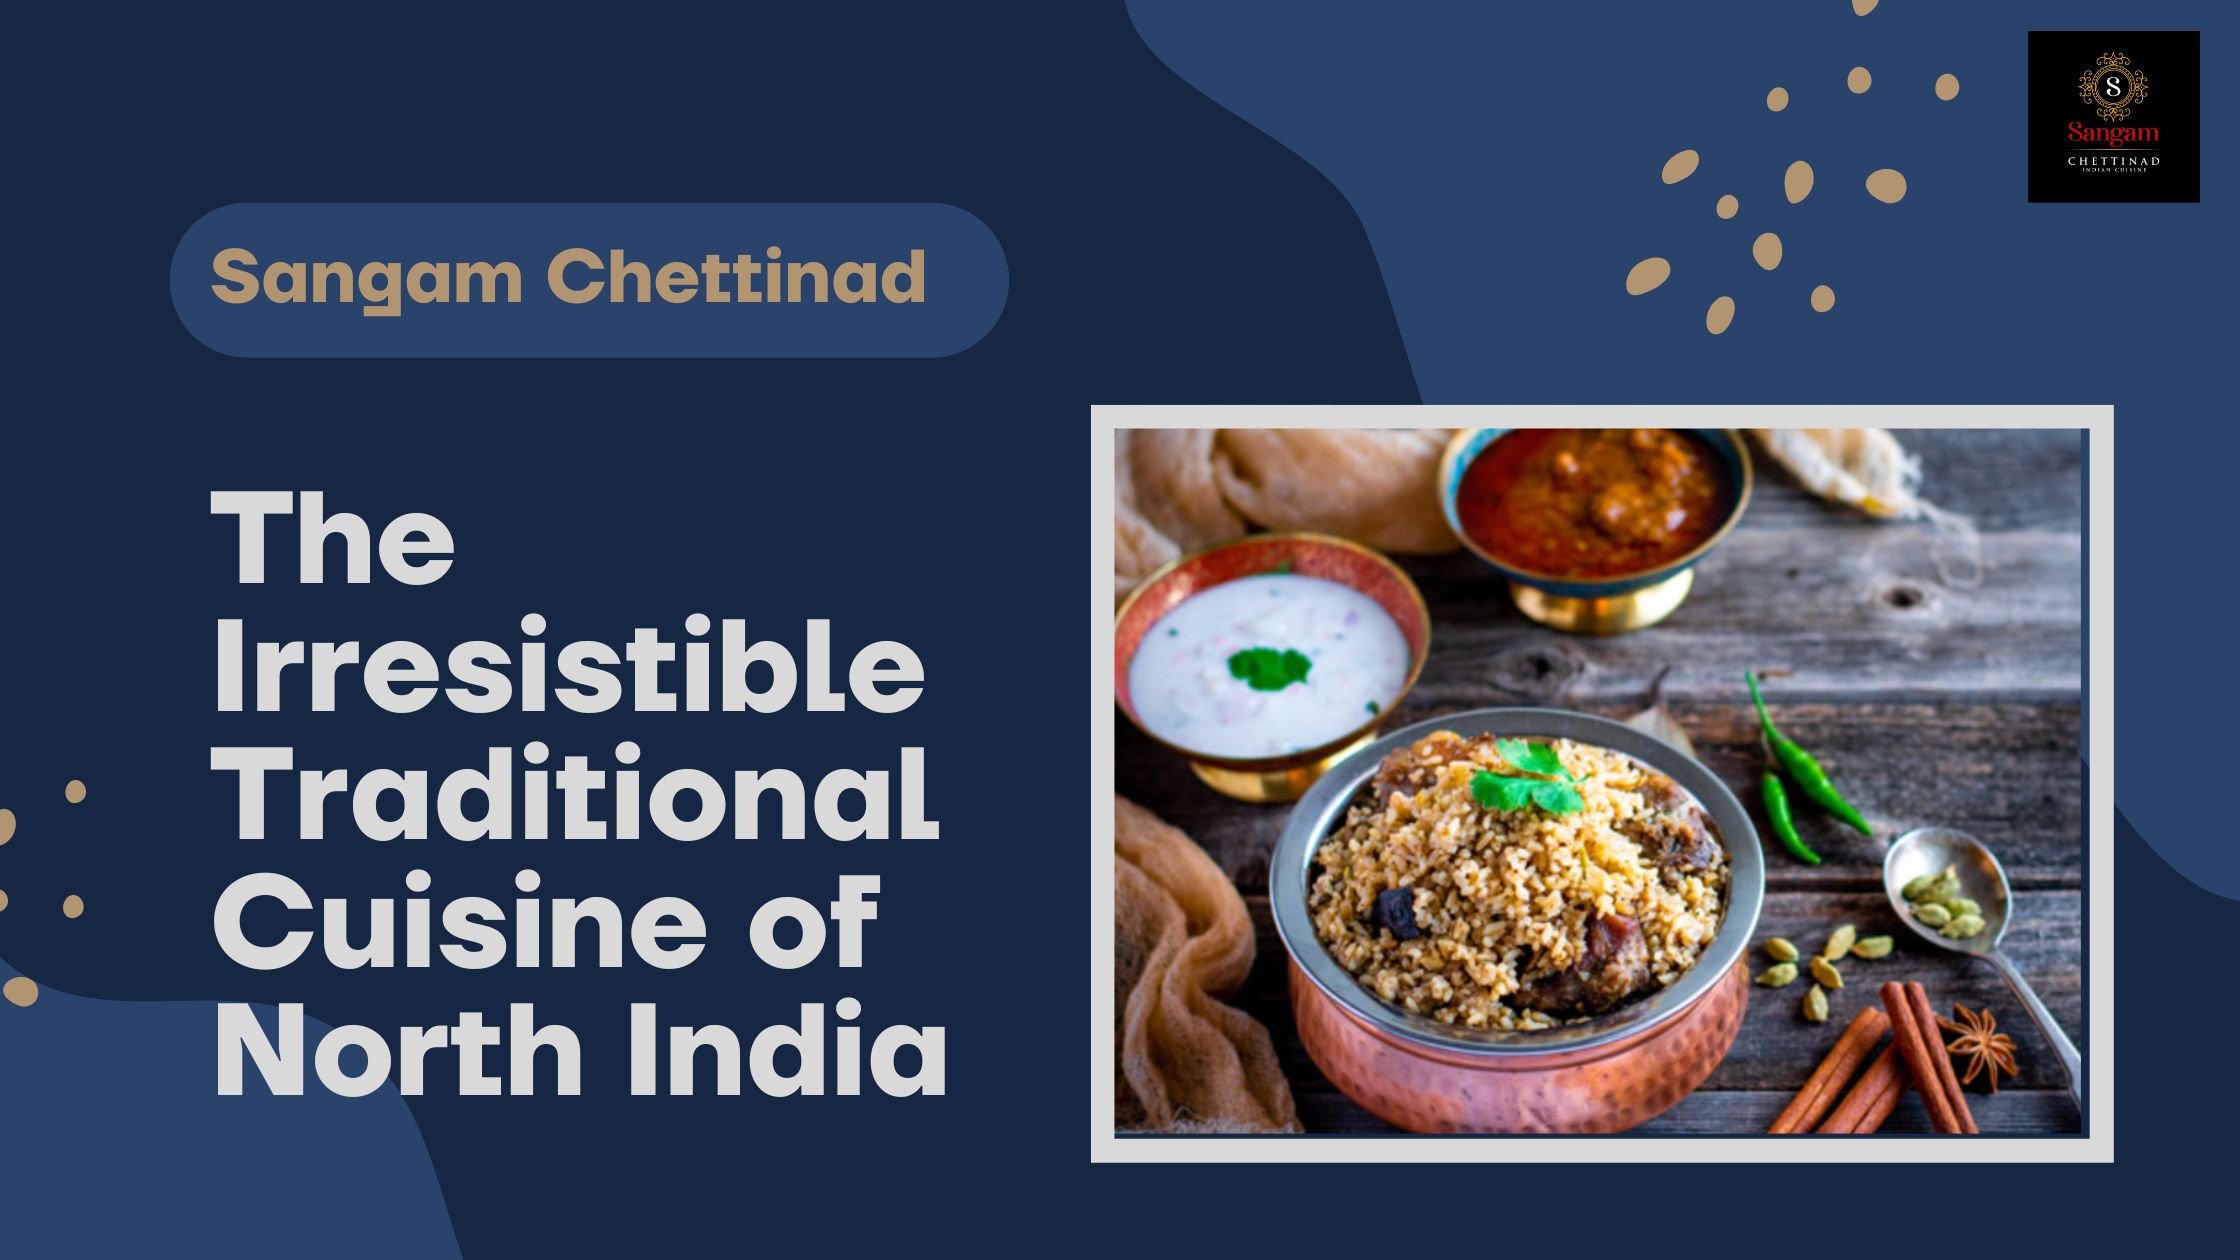 The Irresistible Traditional Cuisine of North India